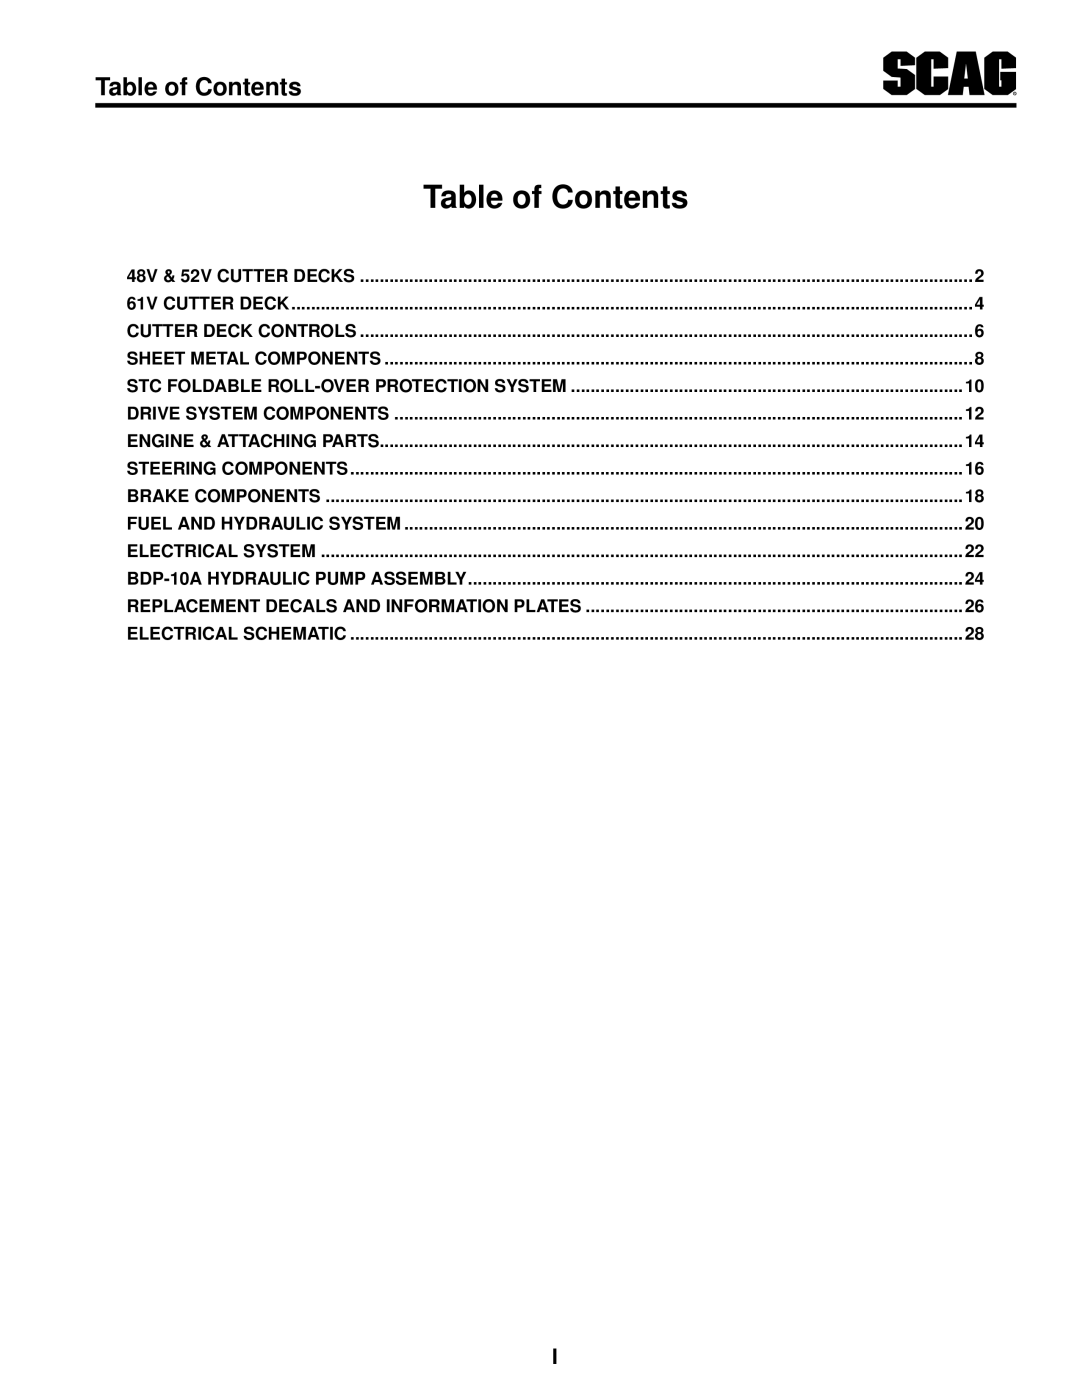 Scag Power Equipment SMWC-61V, SMWC-52V, SMTC-48V manual Table of Contents 